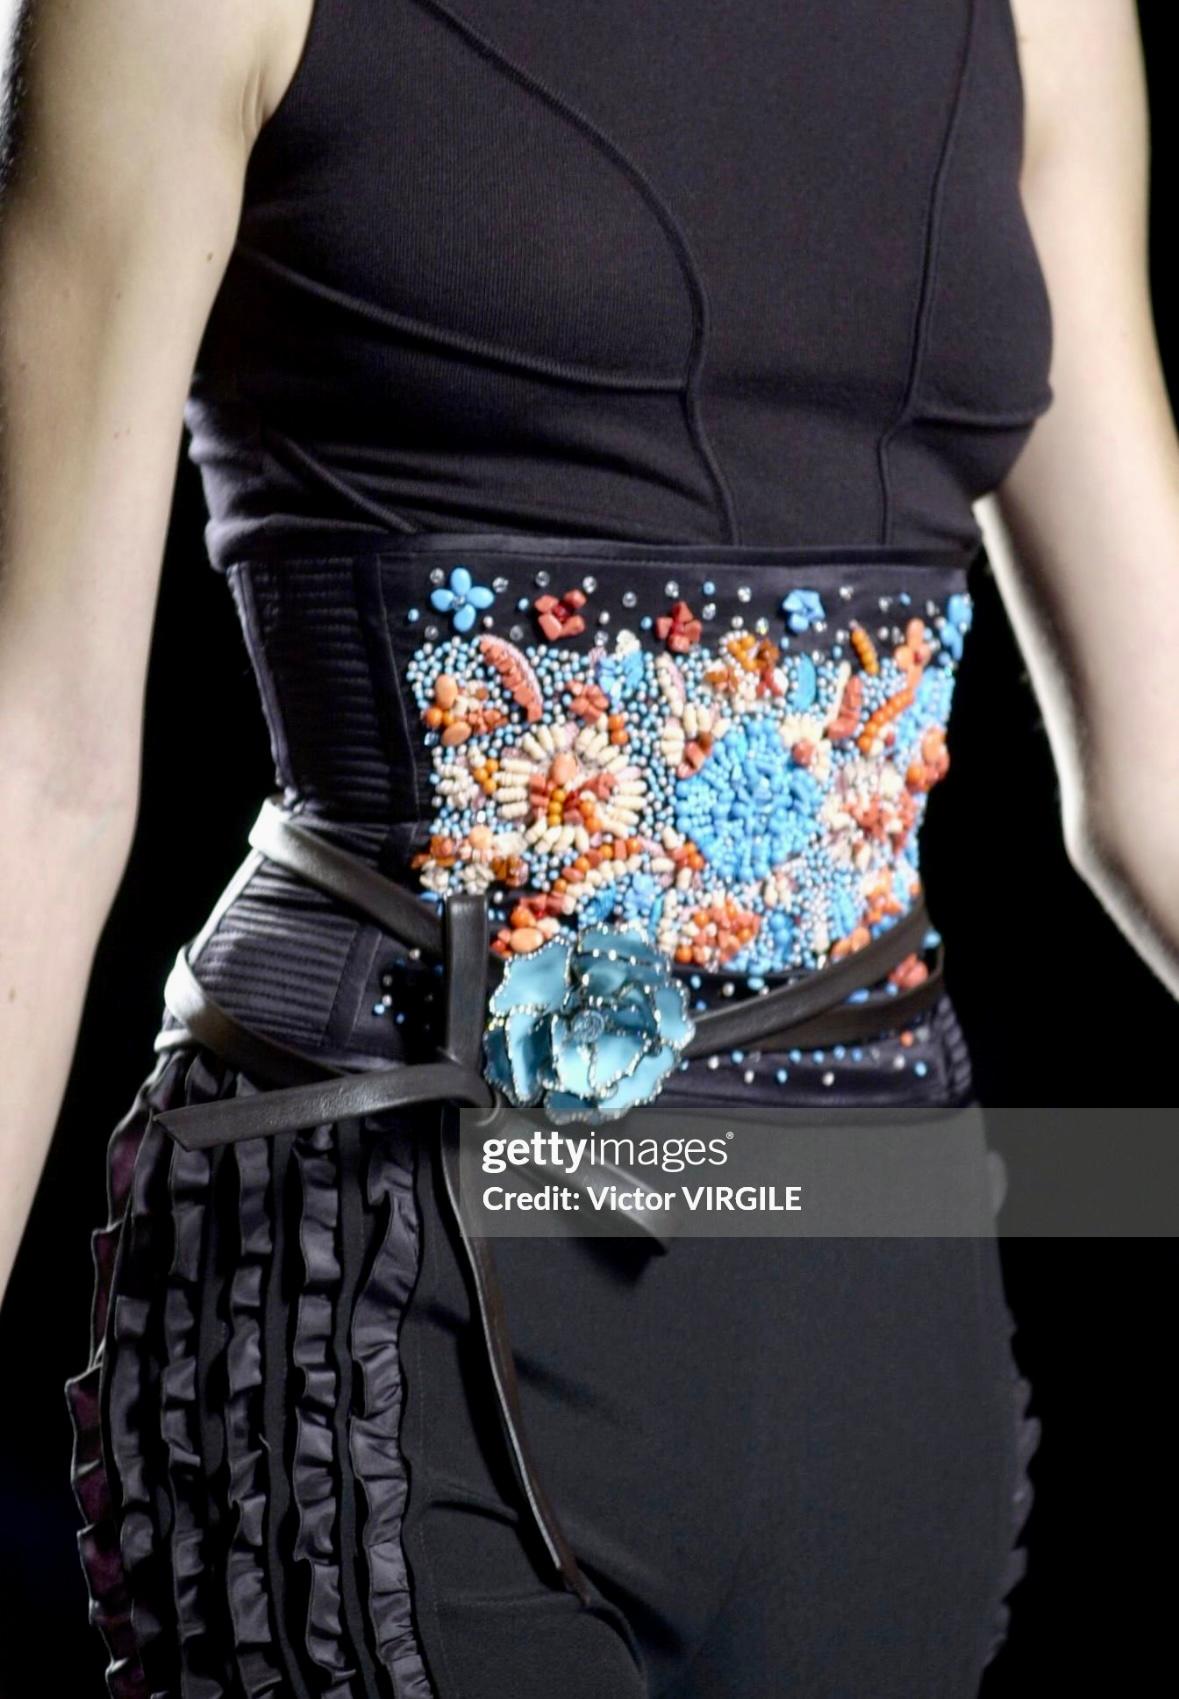 S/S 2002 Valentino Garavani Runway Ad Black Quilted Beaded Corset Waist Belt In Excellent Condition For Sale In West Hollywood, CA